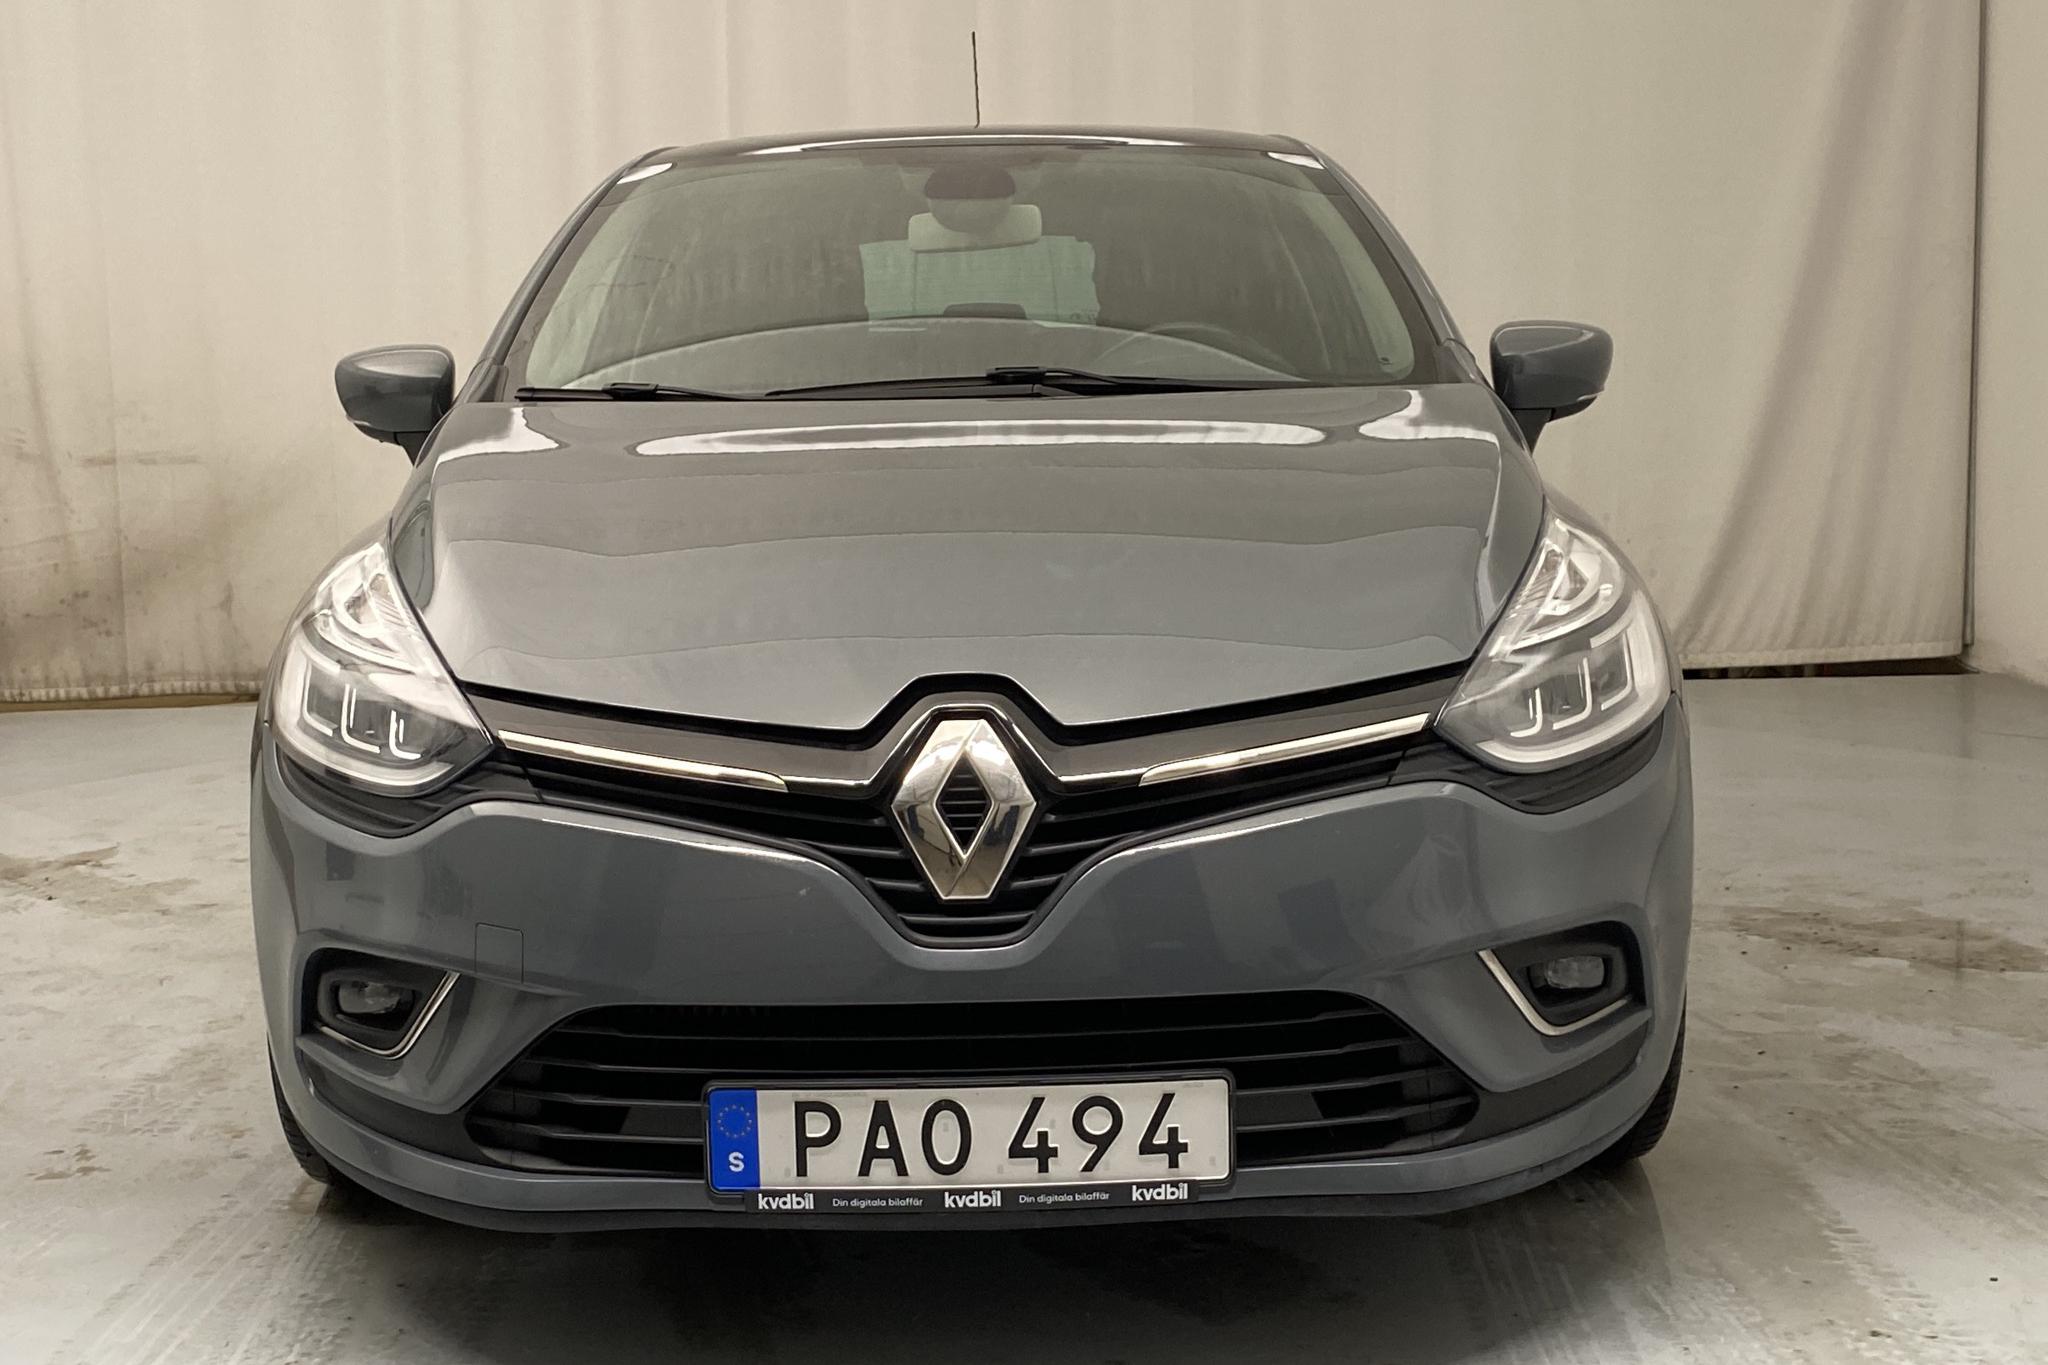 Renault Clio IV 0.9 TCe 90 5dr (90hk) - 39 730 km - Manual - gray - 2018